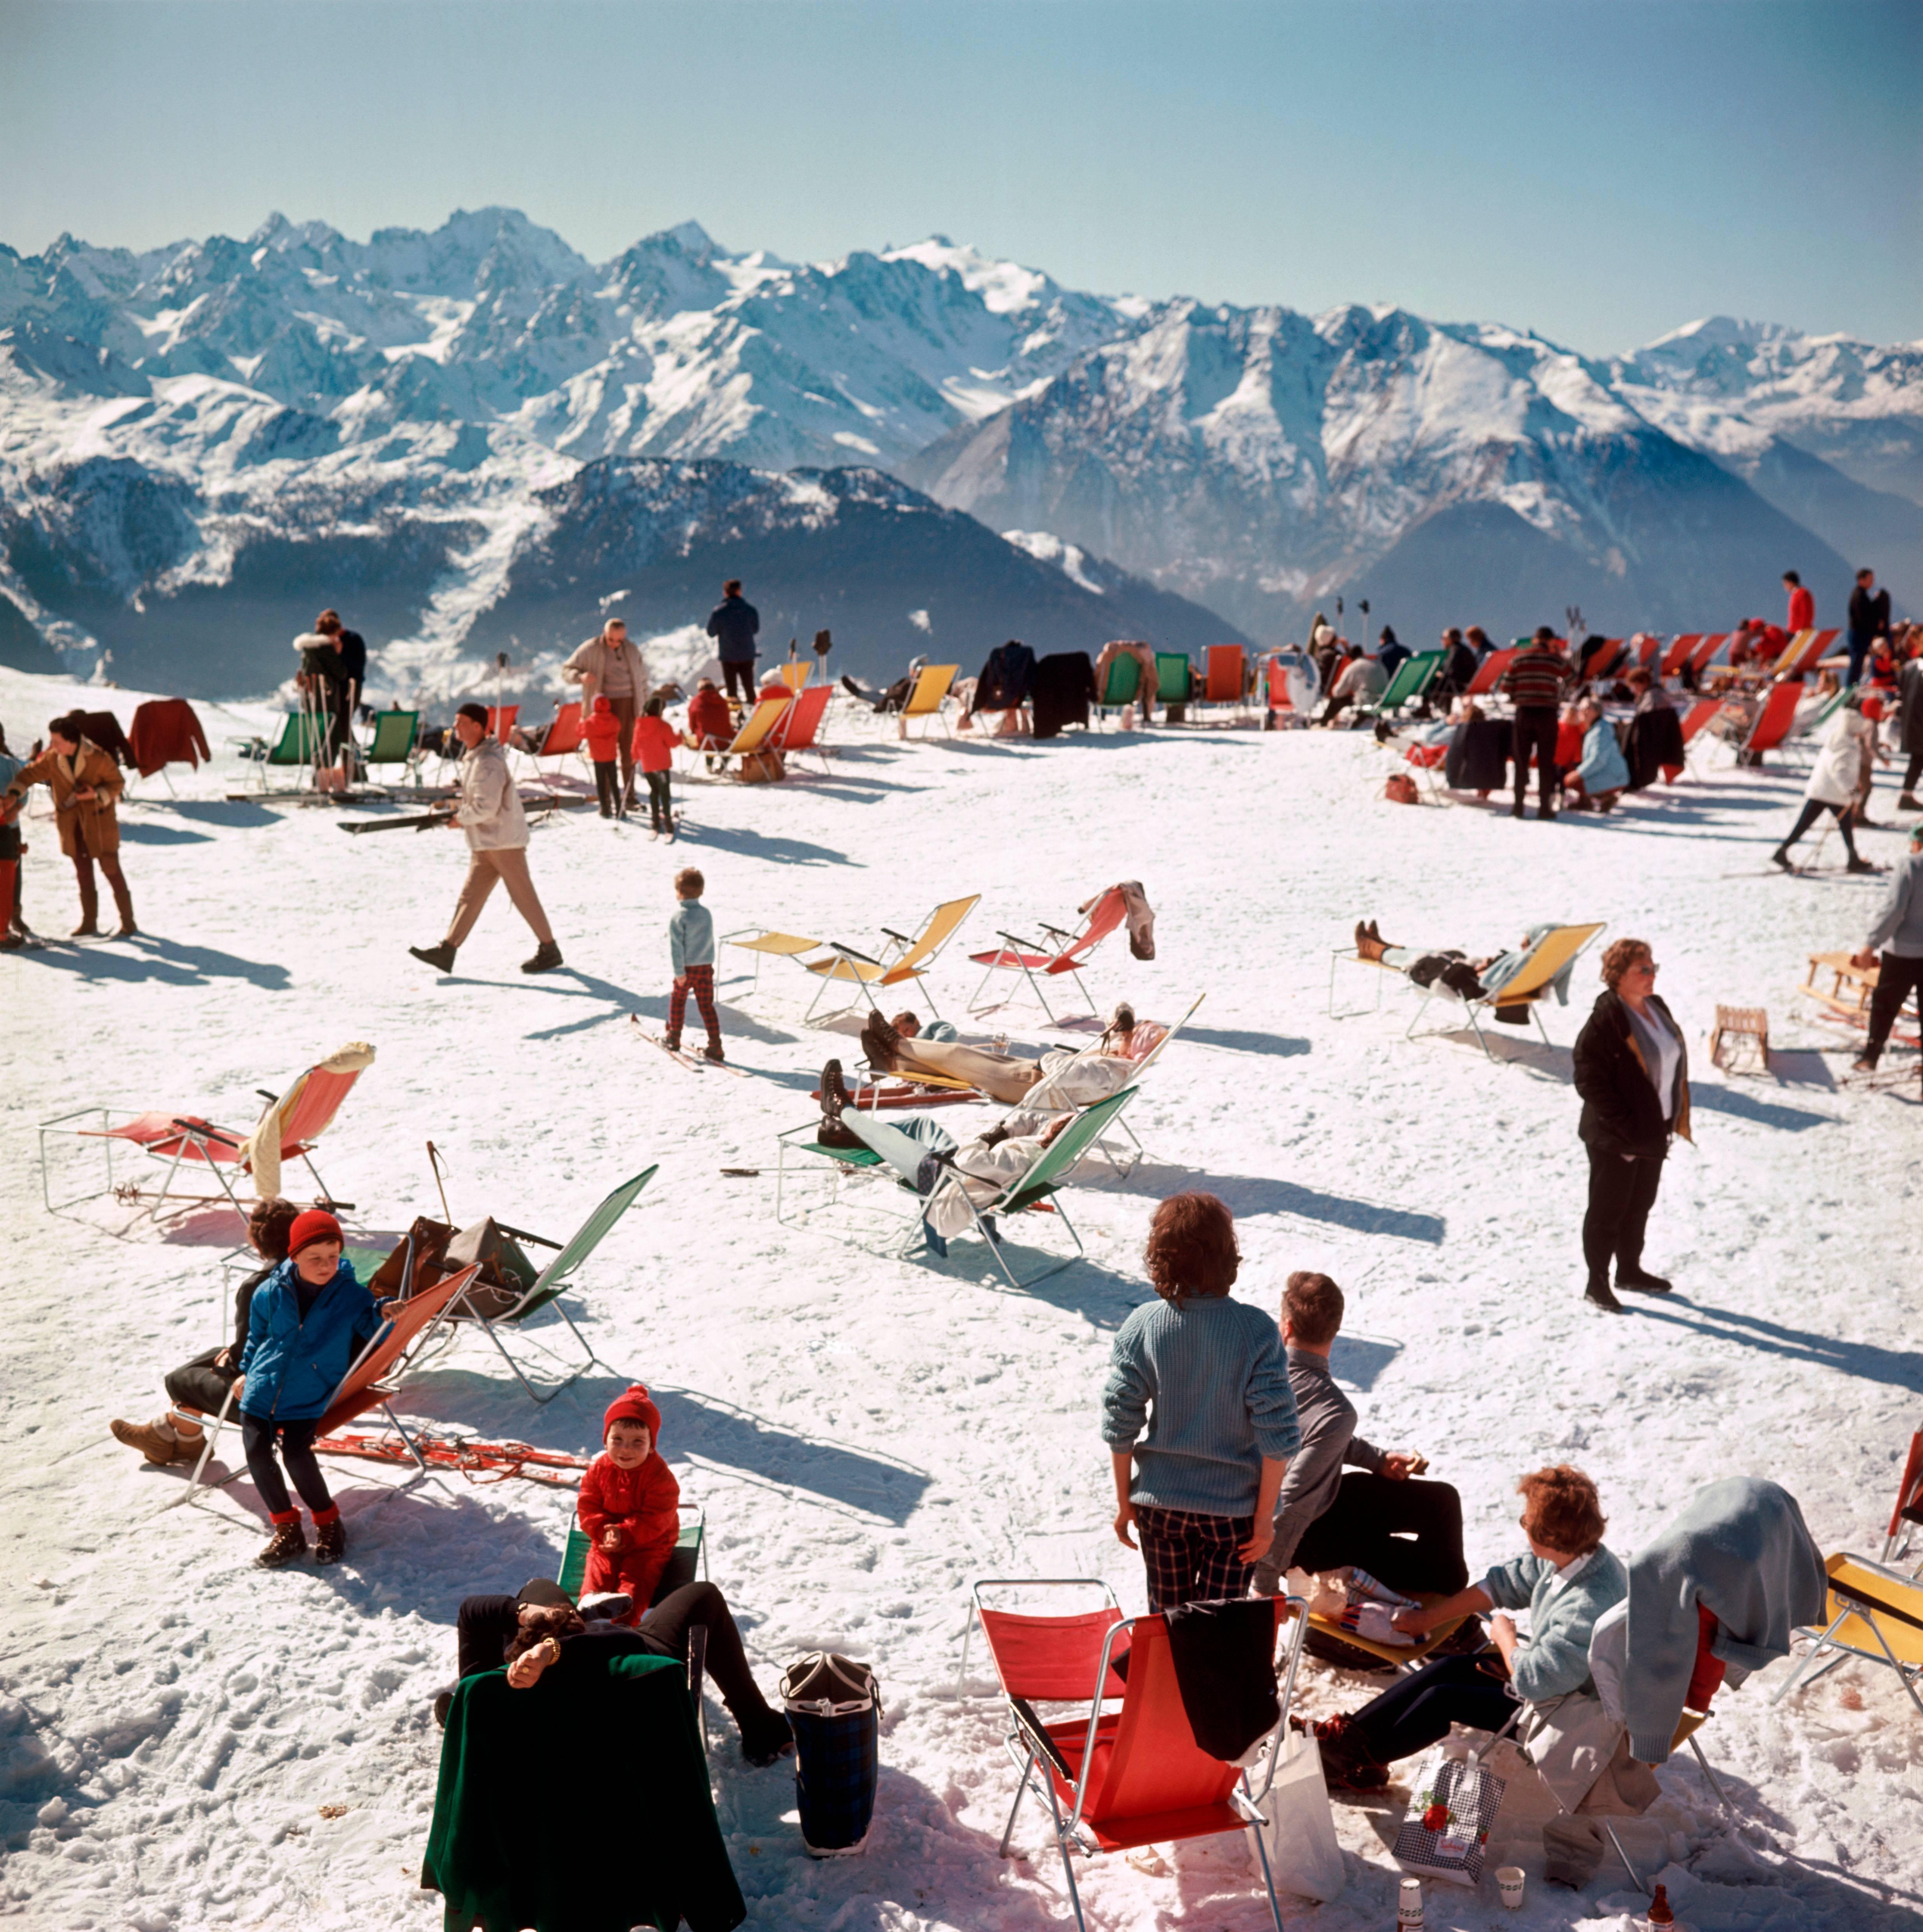 Holiday-makers take the sun on a mountain top in Verbier, 1964. 

C-type print from the original transparency held at the Getty Images Archive, London. Numbered and stamped by The Slim Aarons Estate.  Certificate of Authenticity included. Mounted in